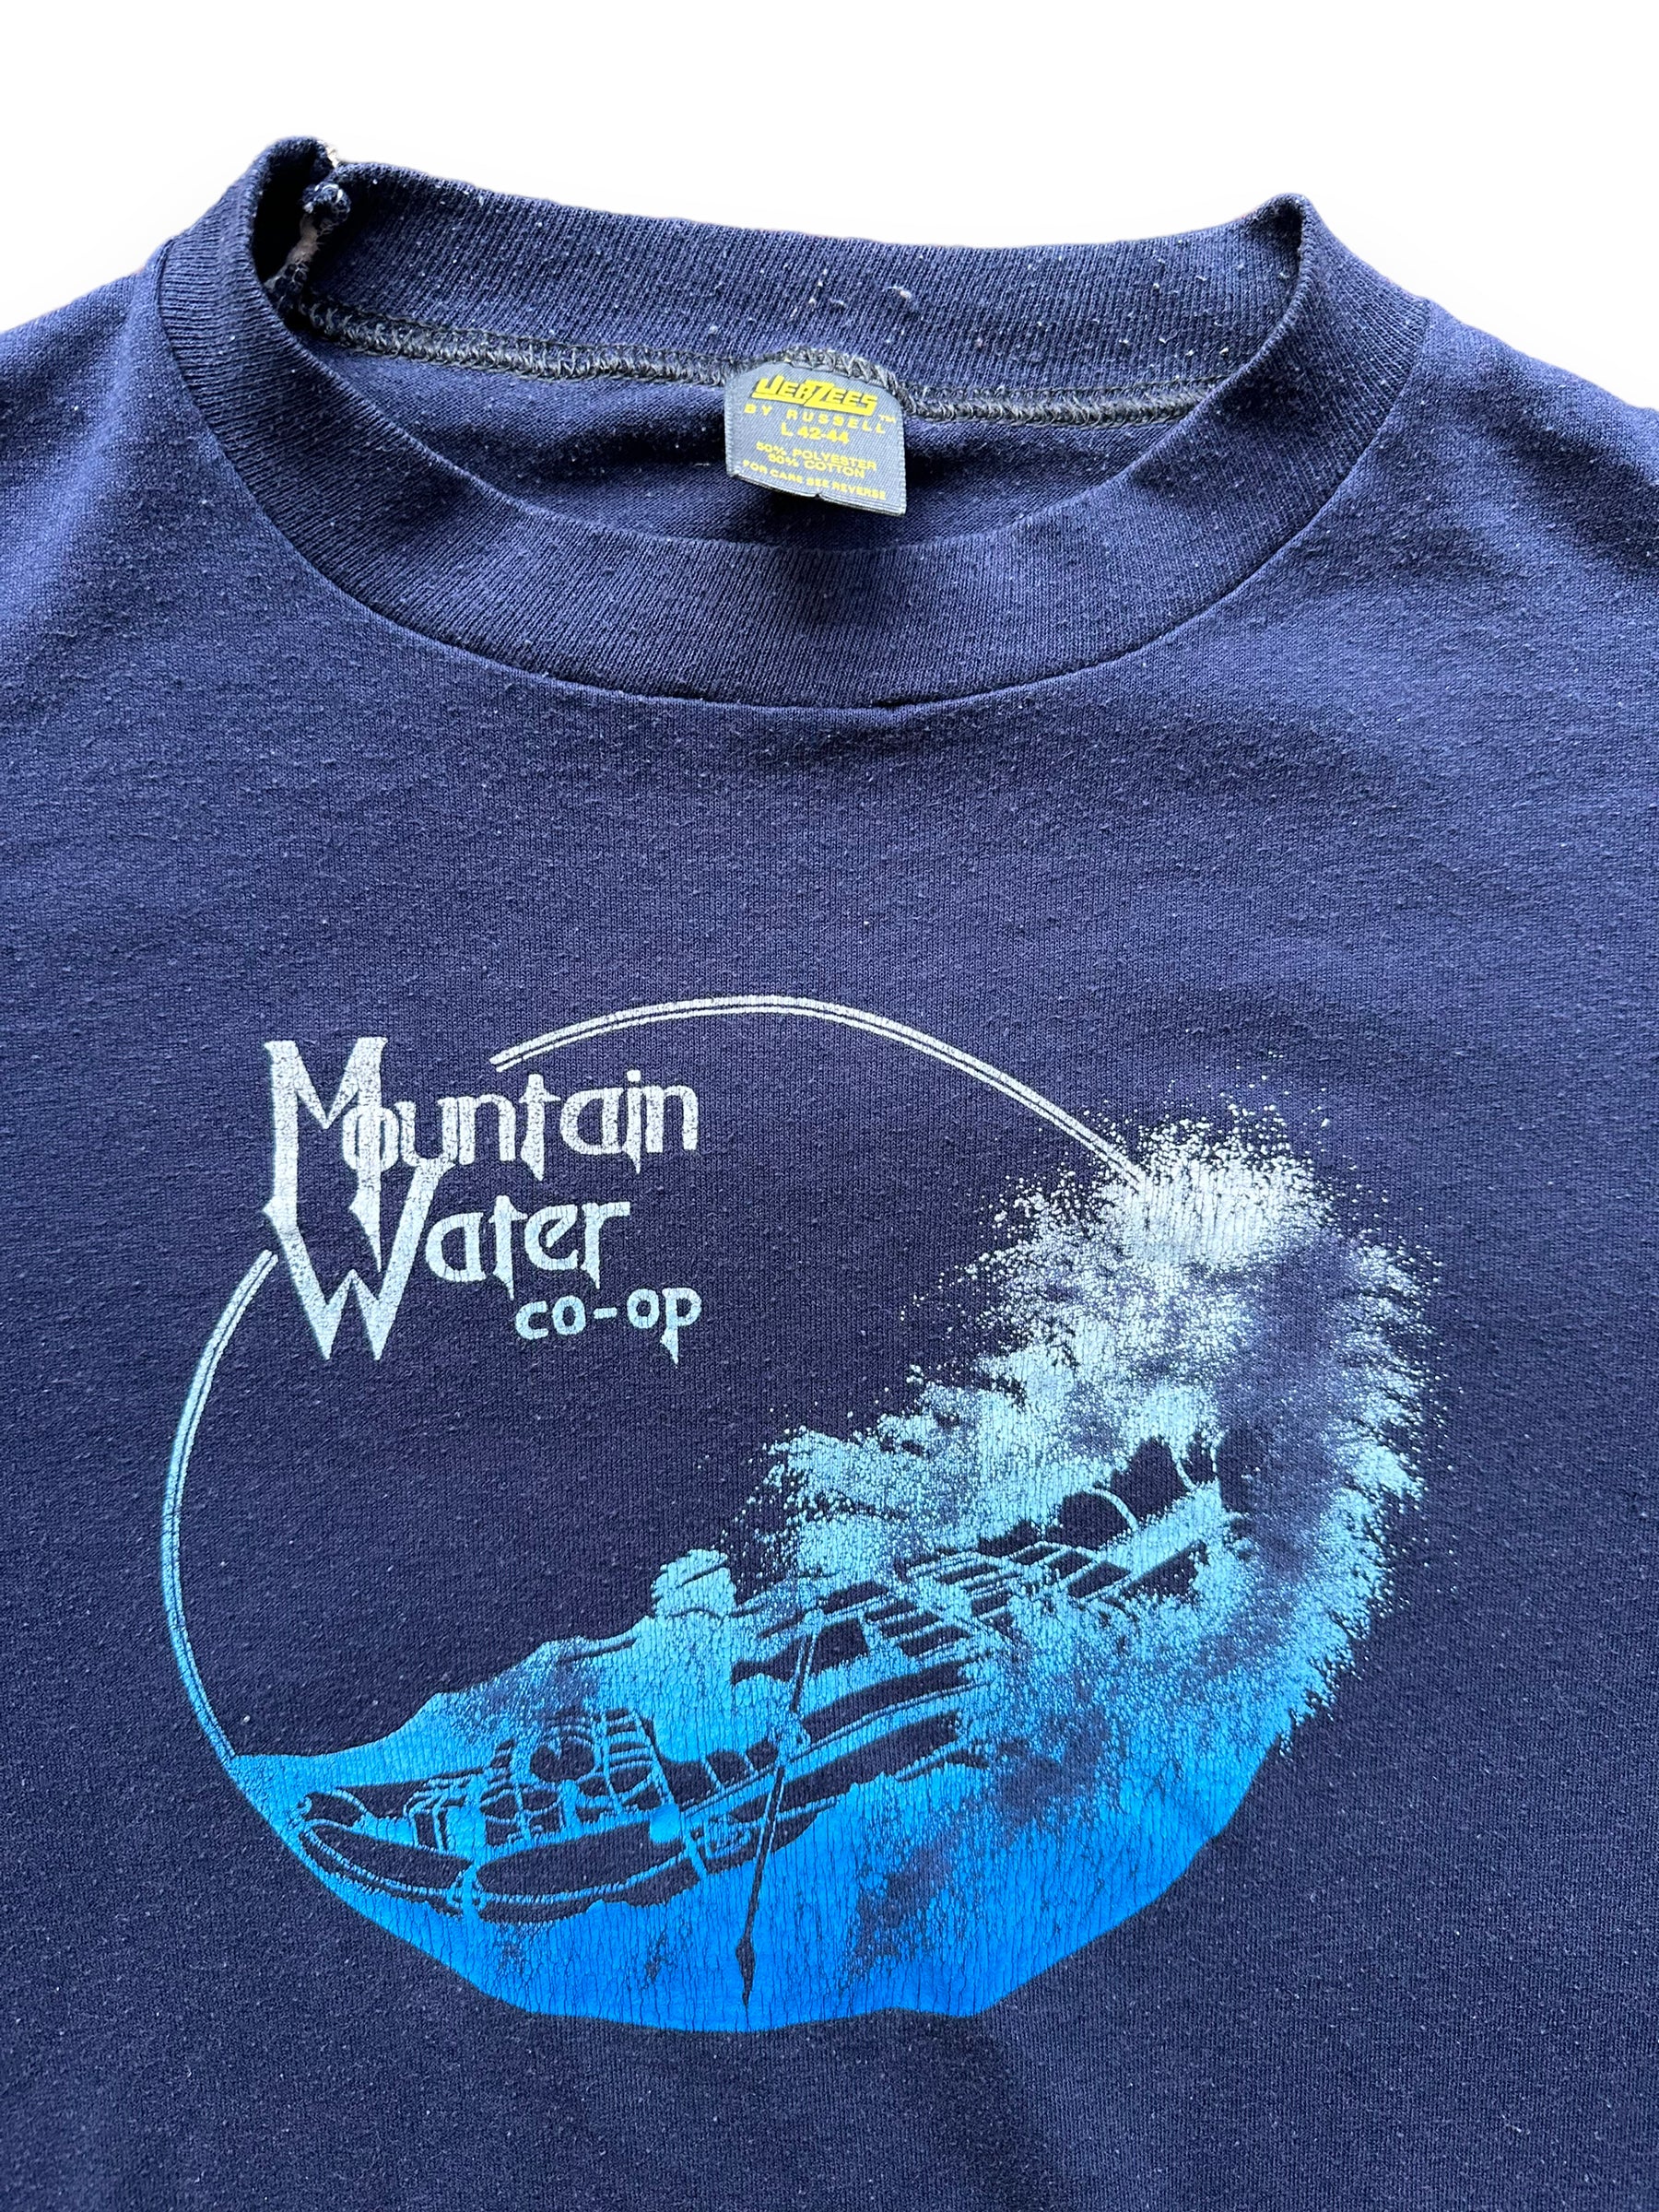 SZ Water Co-op Vintage Tee Graphic L | Owl – Barn Mountain Seatt Vintage T-Shirts The